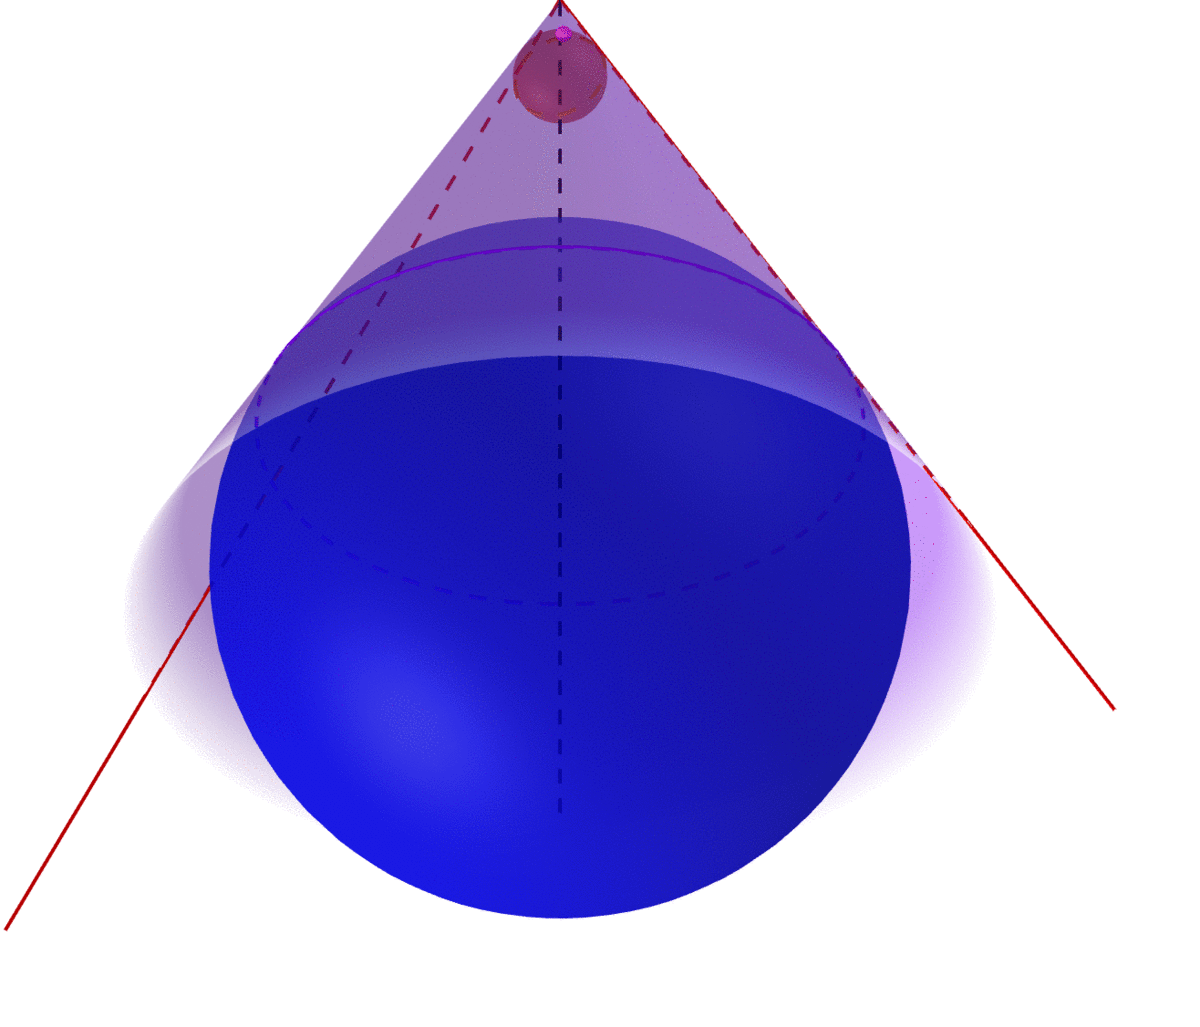 The union of infinite many nested balls gives a cone